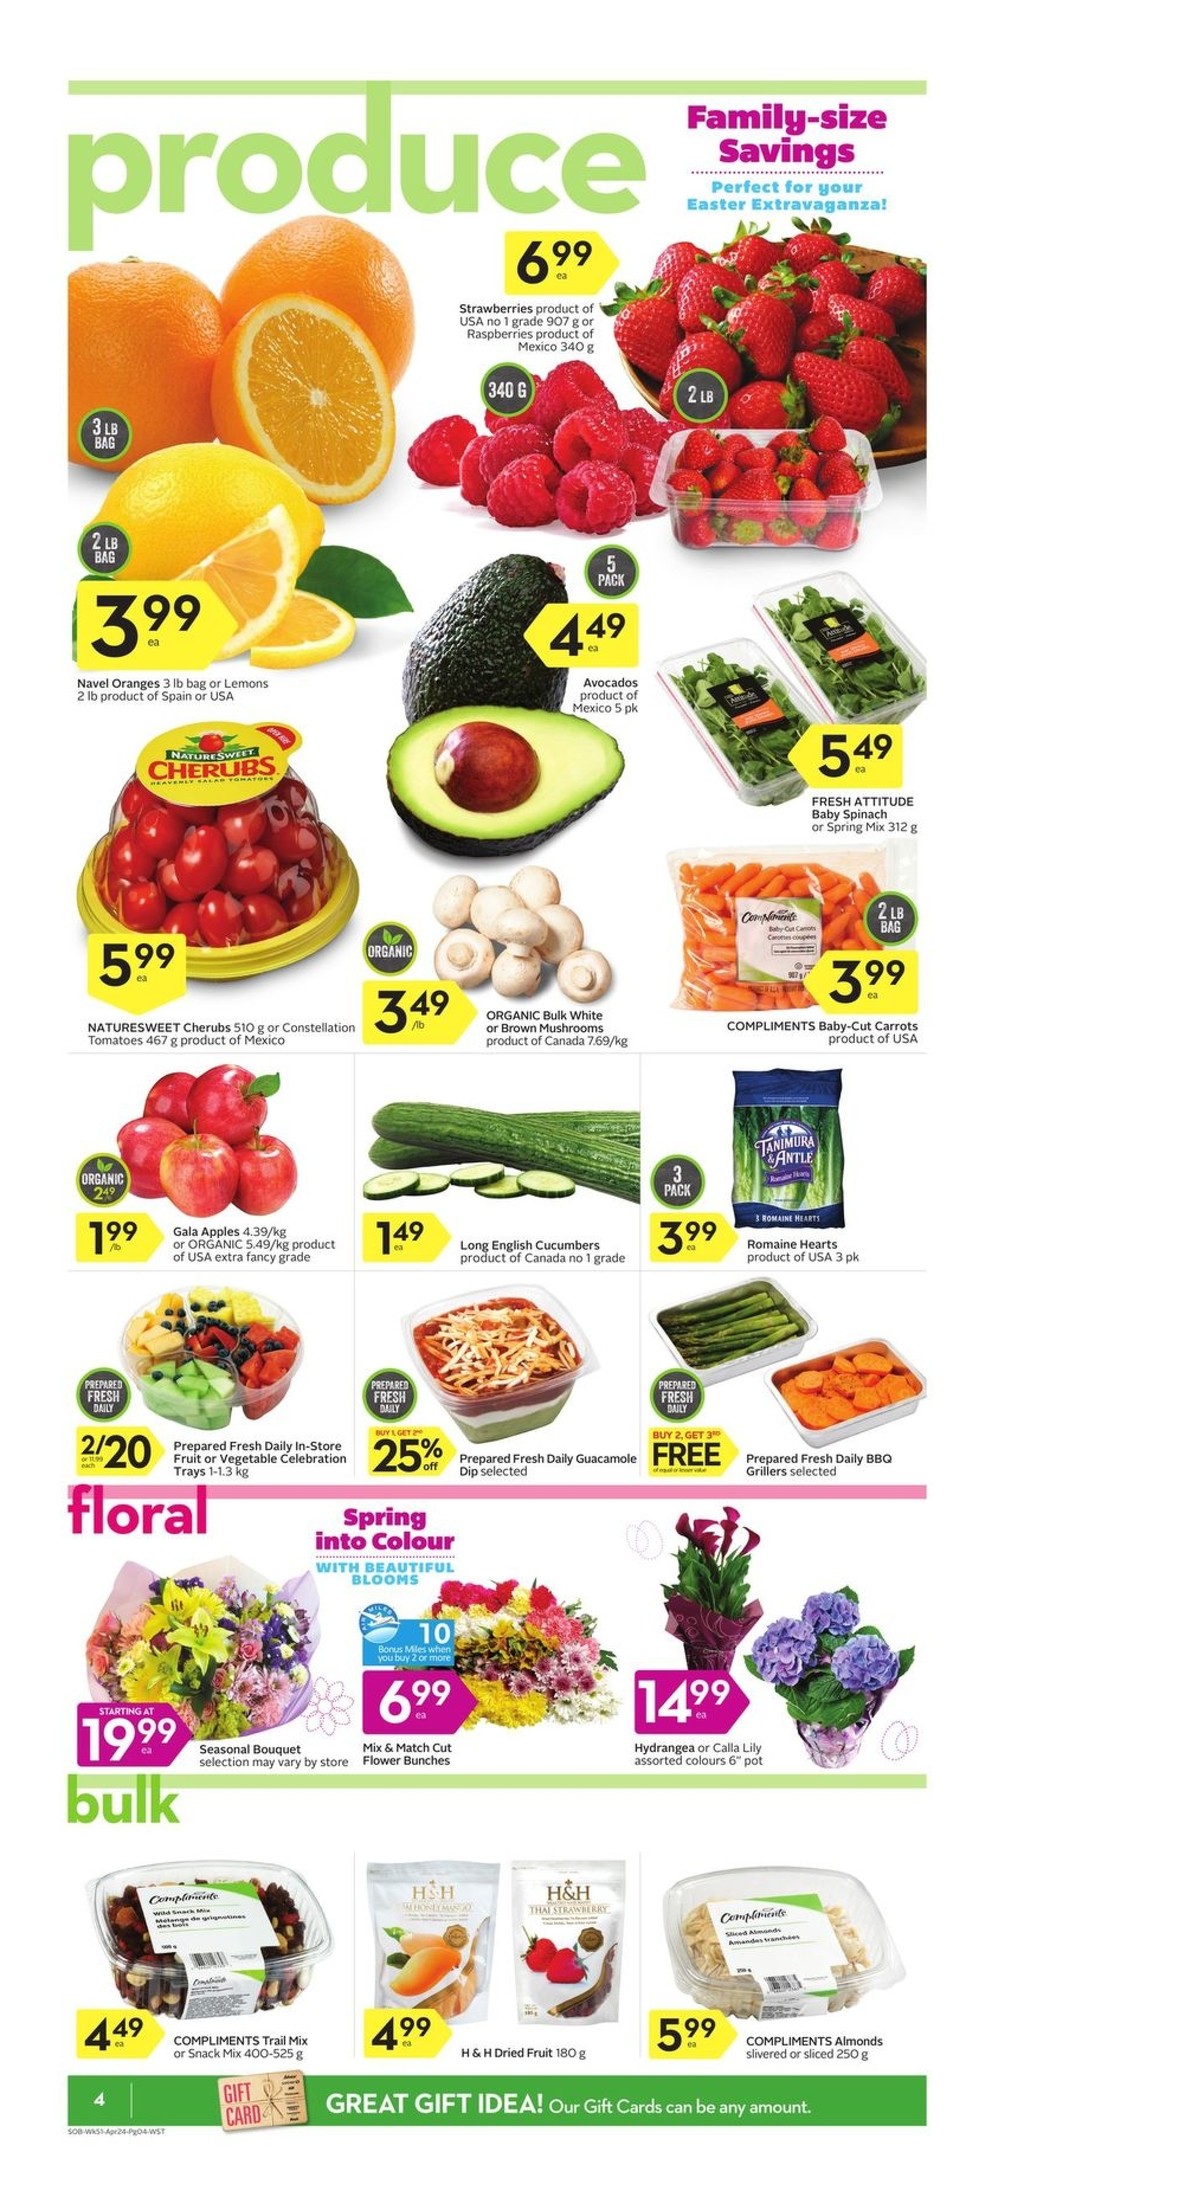 Safeway Flyer from April 18